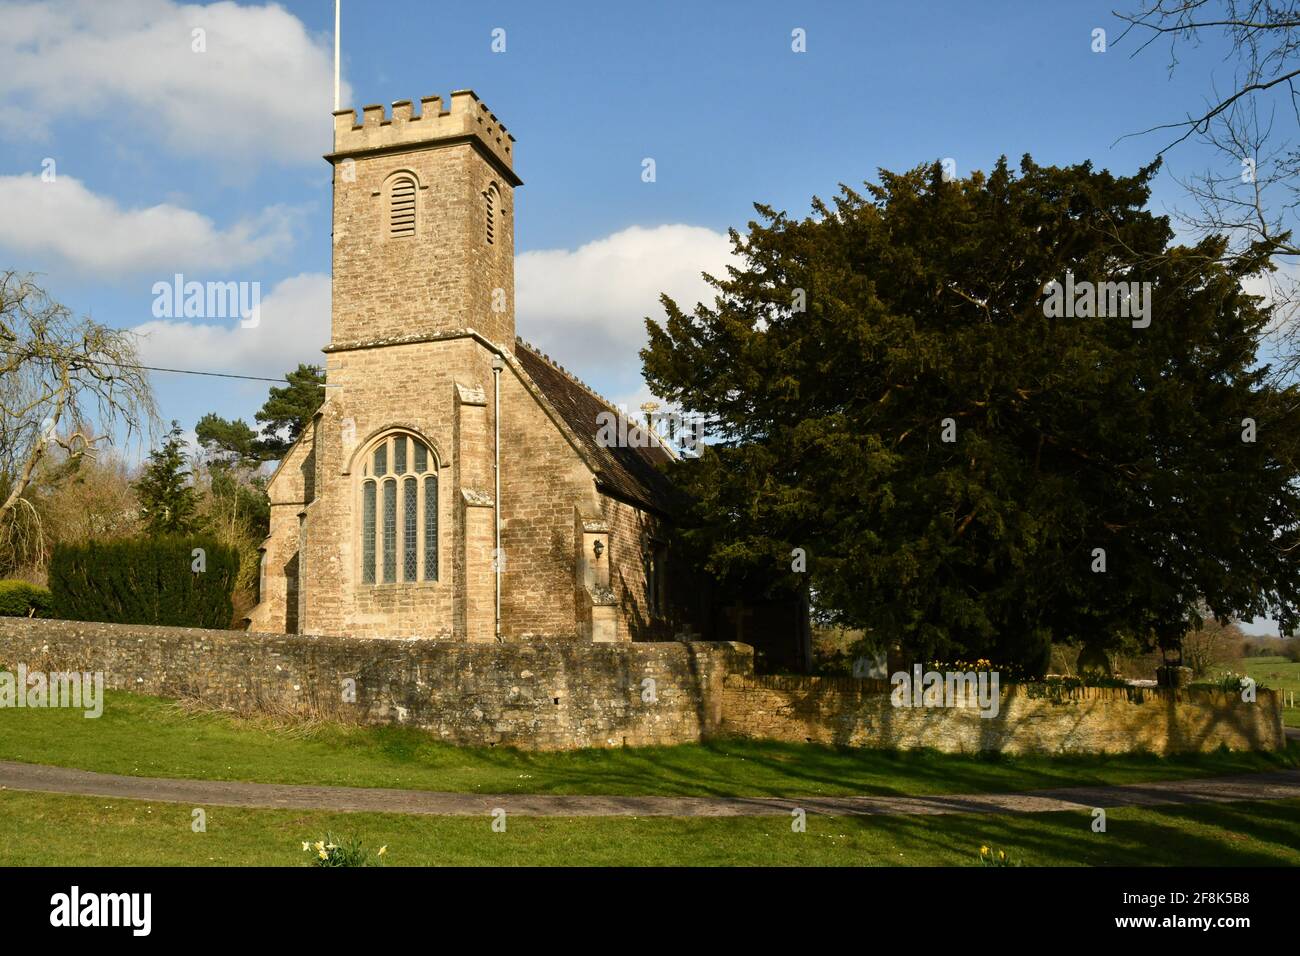 The Church of All Saints at Rodden near Frome Somerset.Built in 1640 it was rebuilt in the Victorian restoration in the mid 19th century. Stock Photo